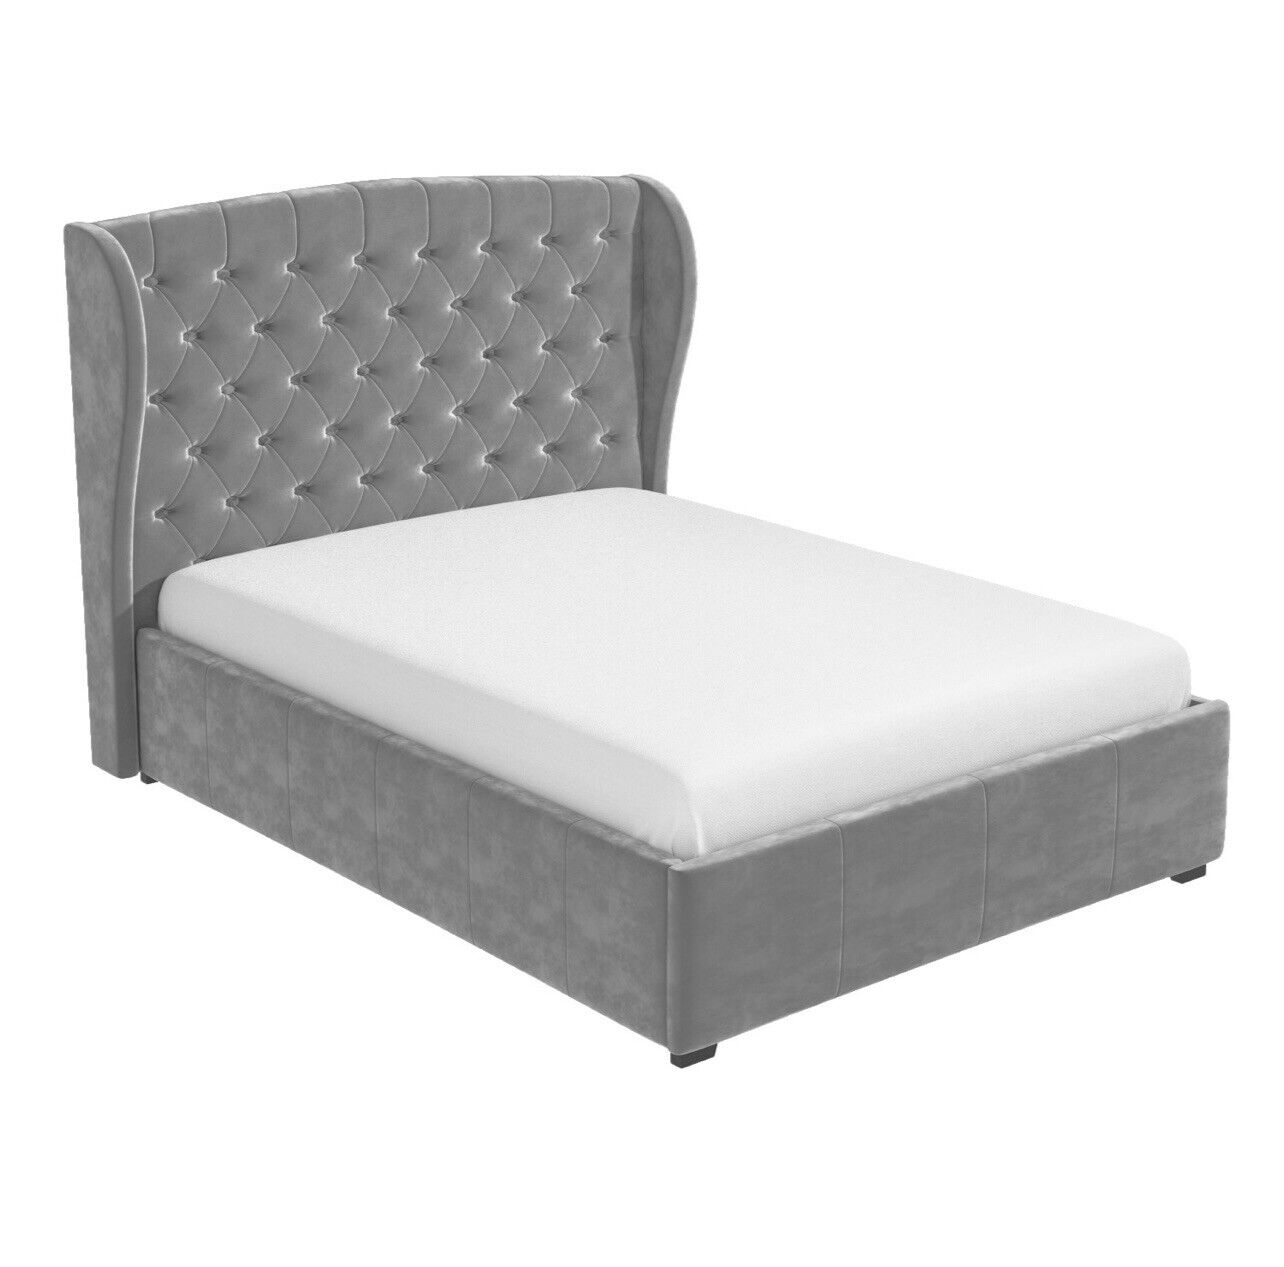 Velvet King Size Bed in Grey with Storage